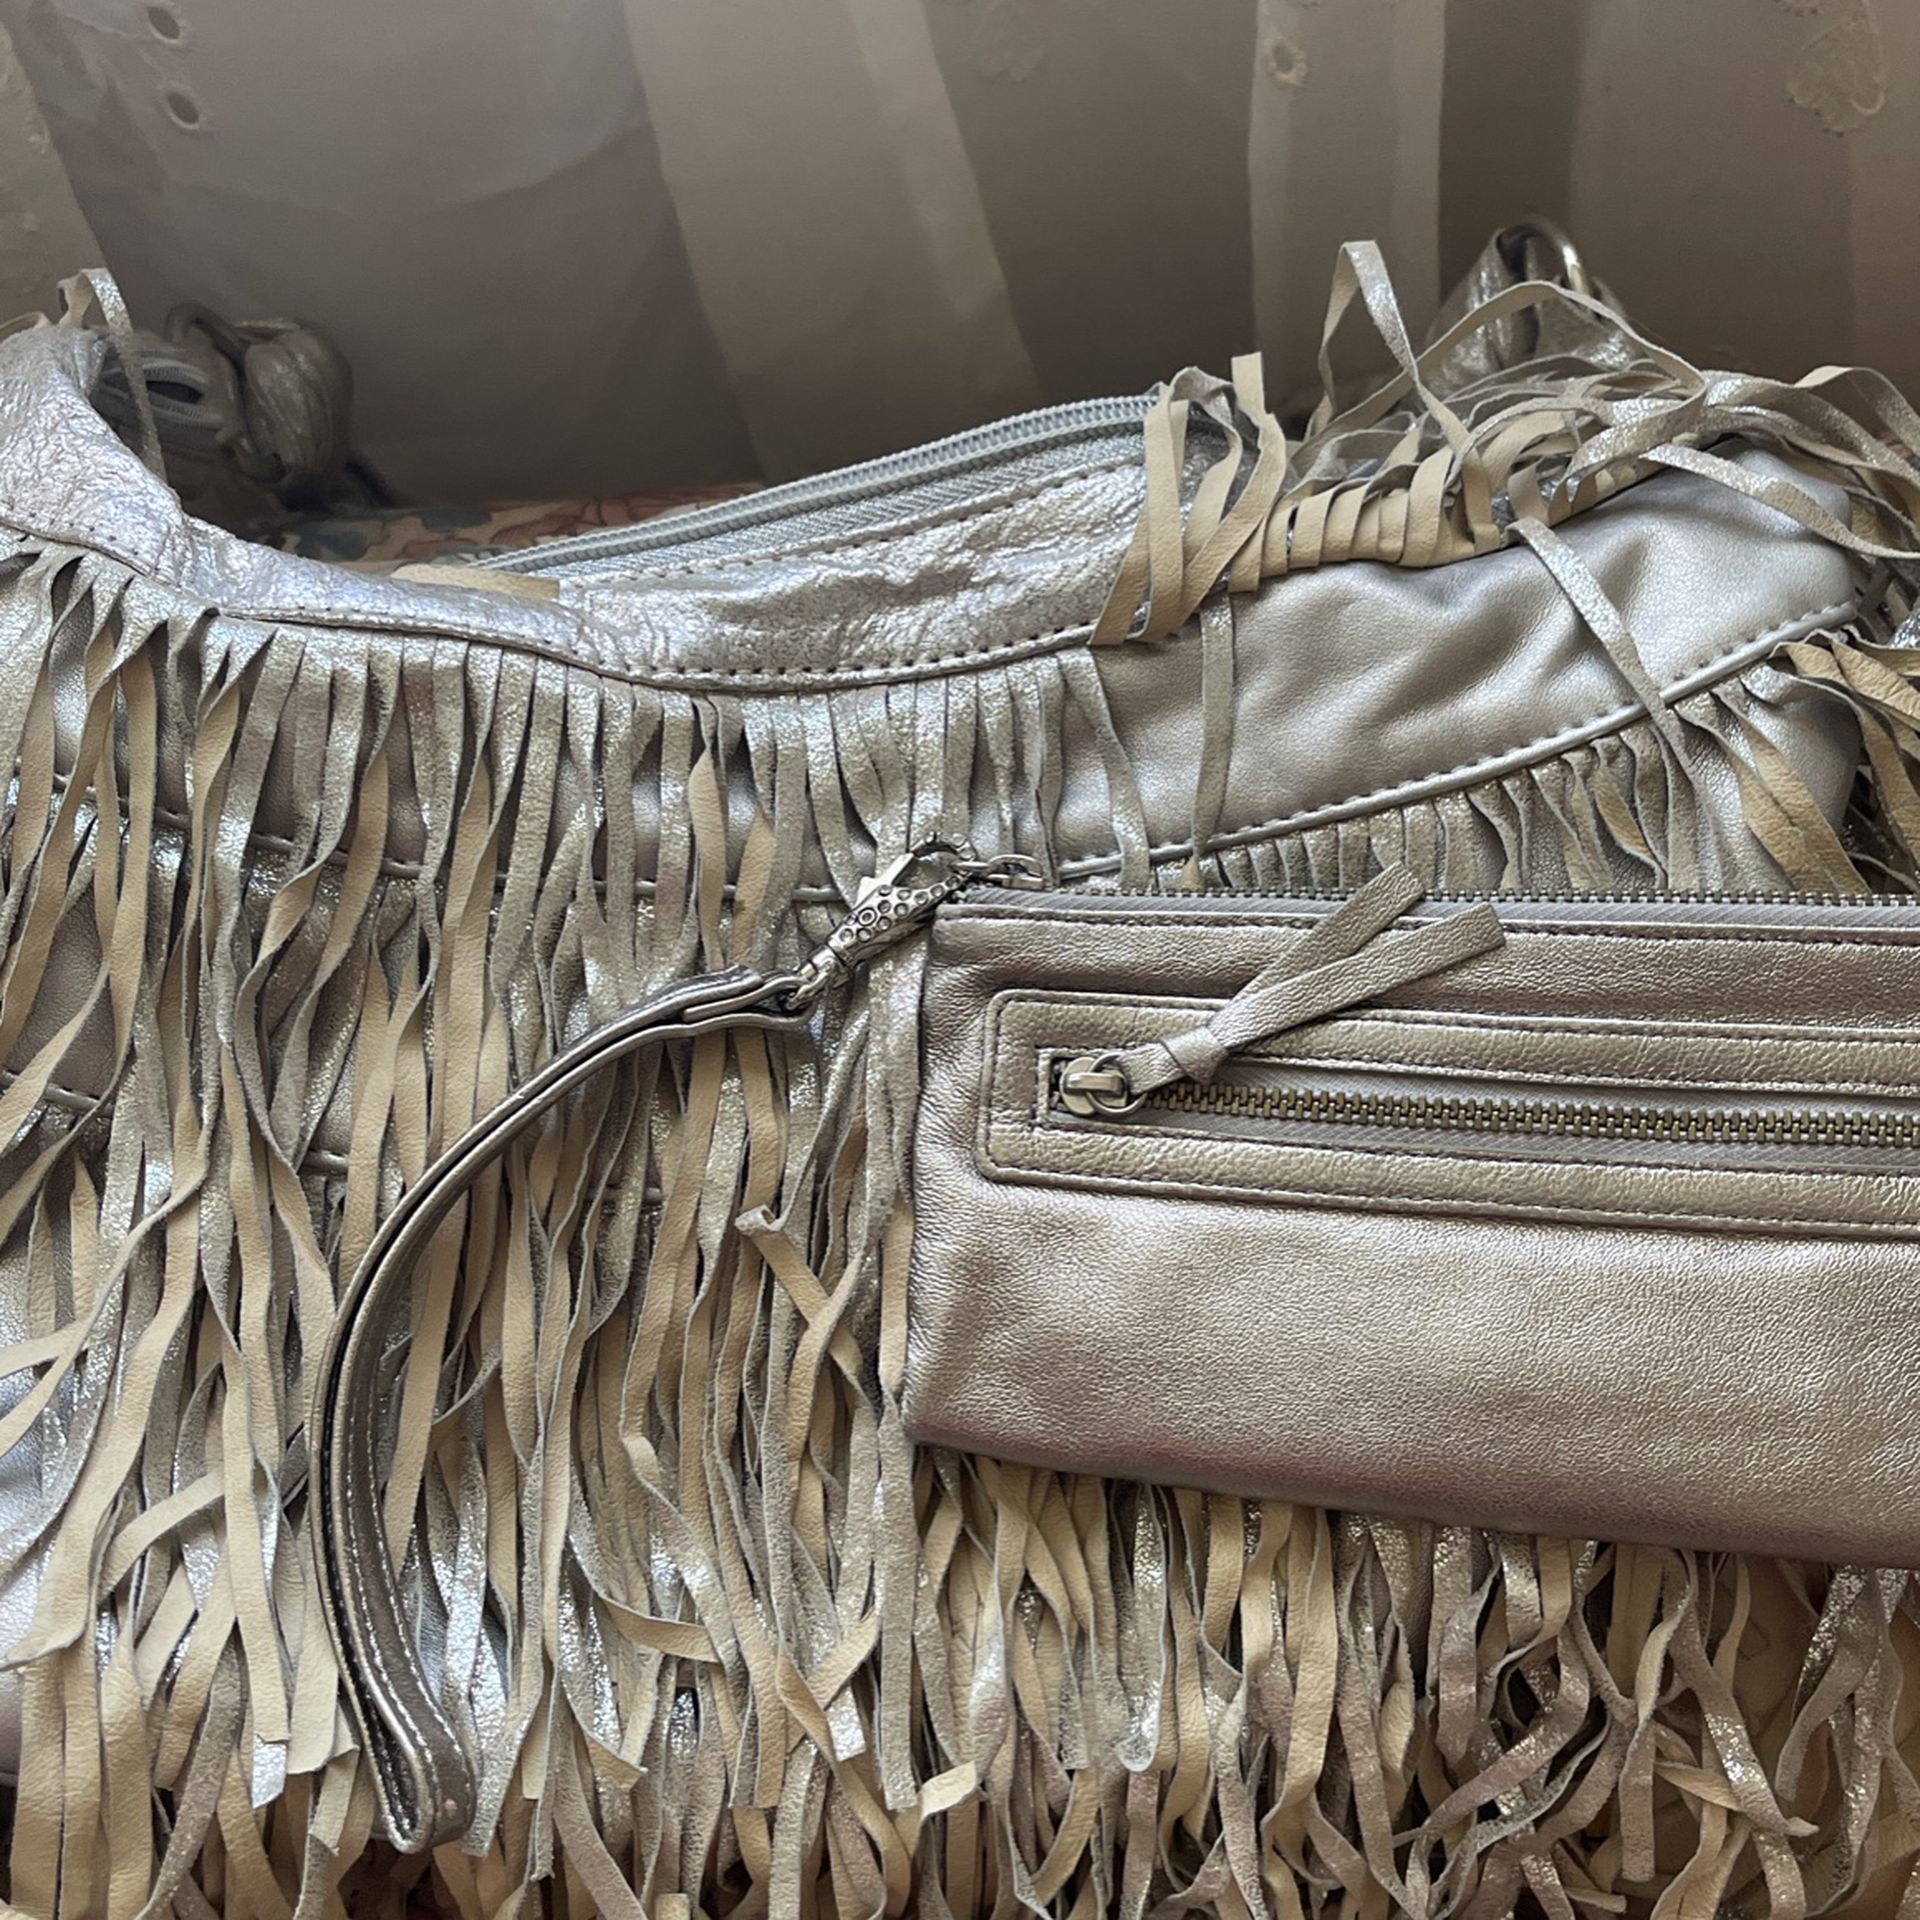 Bebe Silver Gold Fringed Bag With Inside Purse